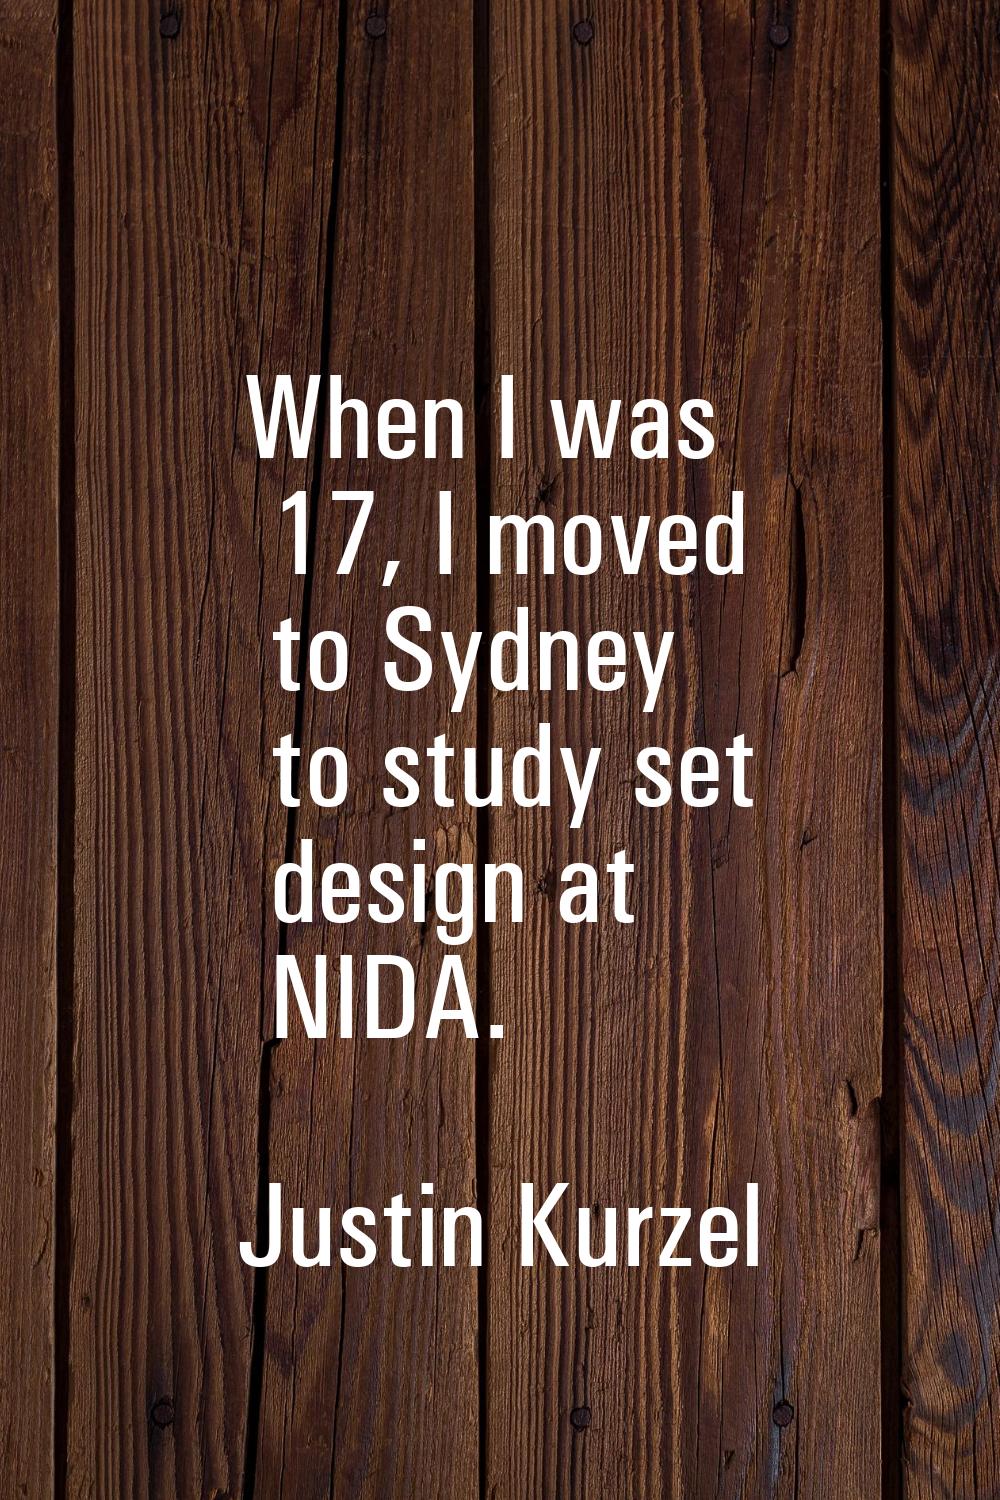 When I was 17, I moved to Sydney to study set design at NIDA.